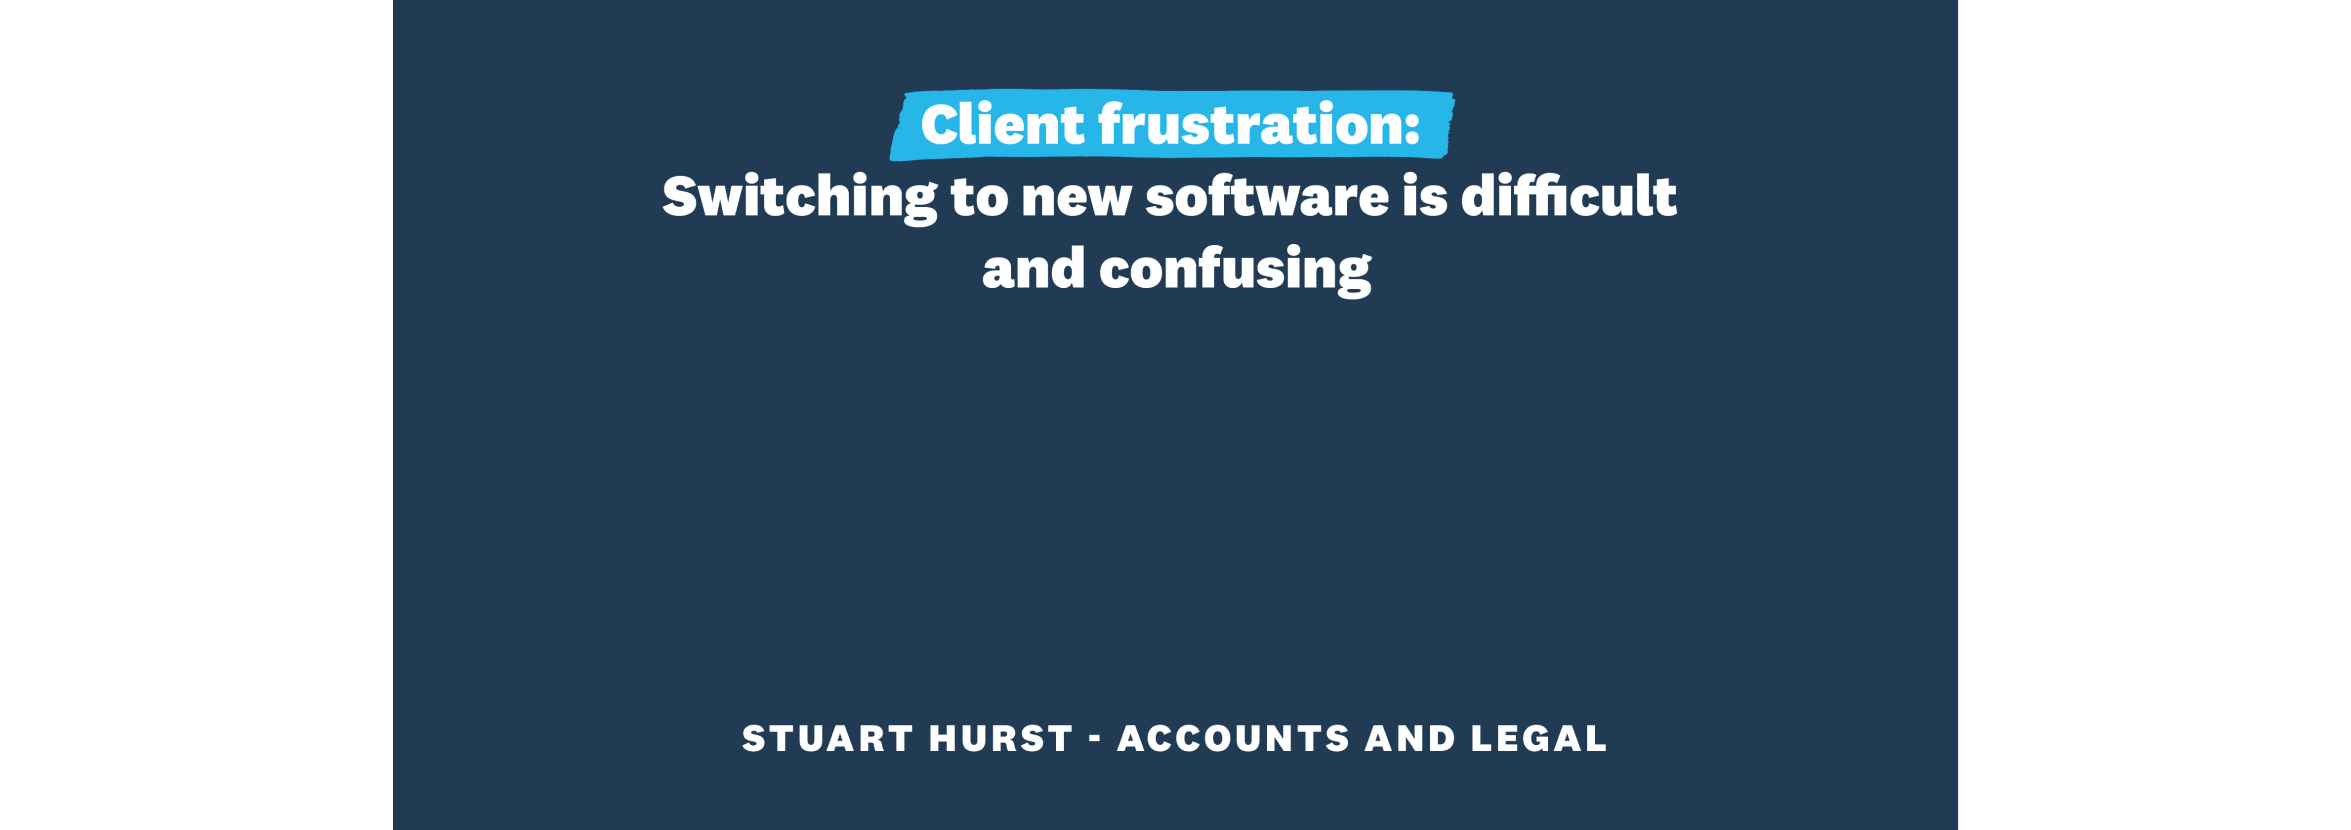 Client frustration: Switching to new software is difficult and confusing